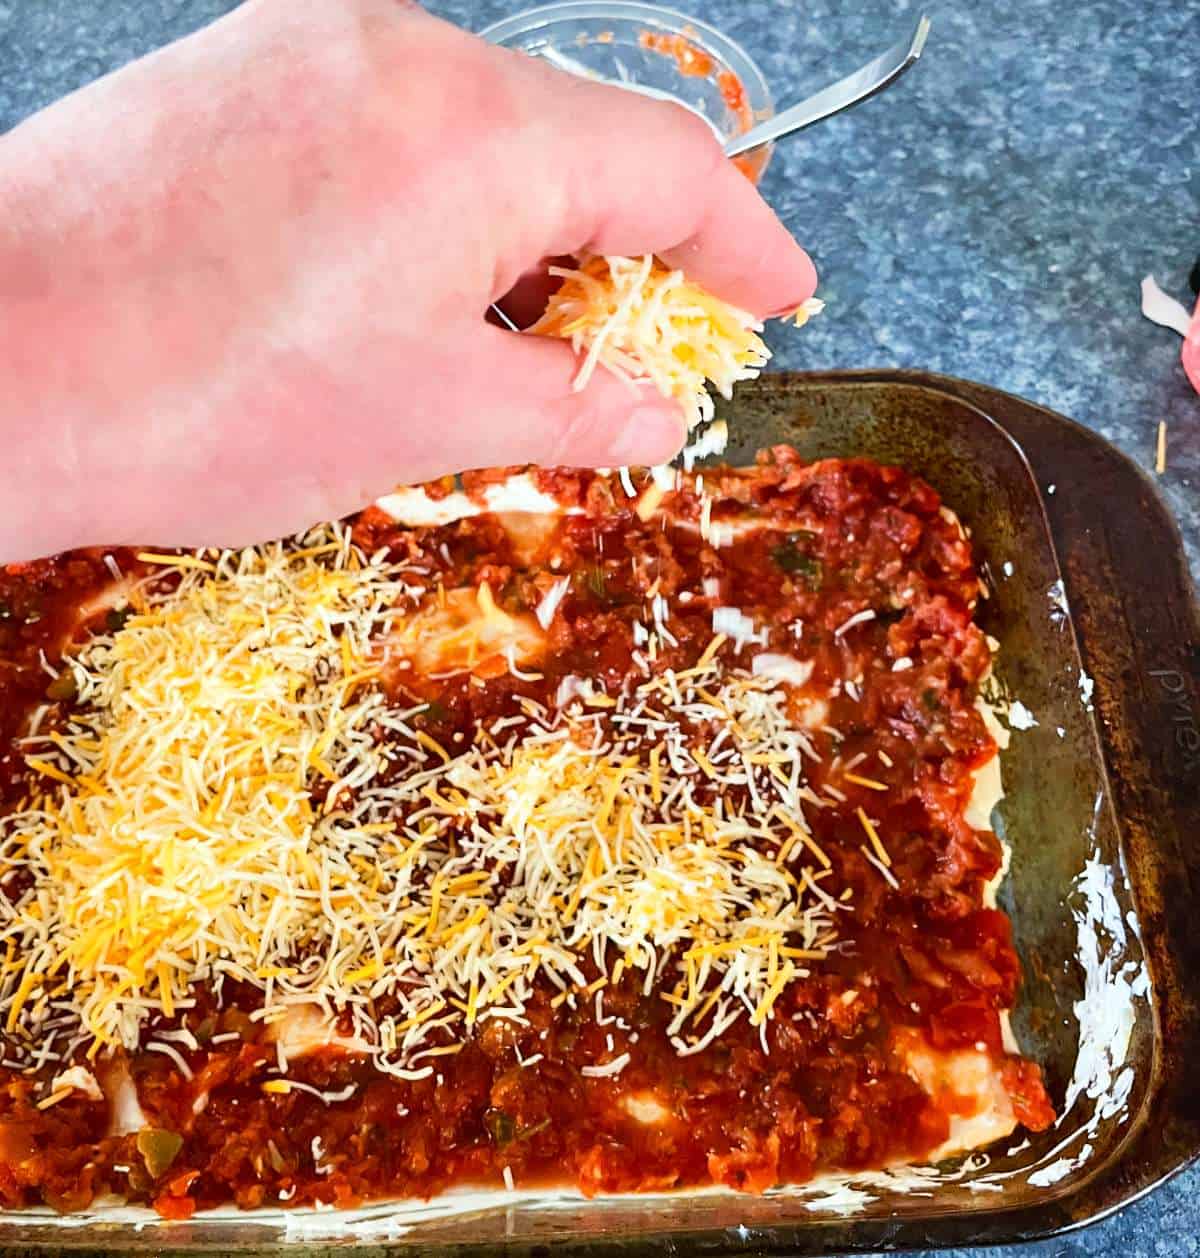 sprinkle shredded cheese over al layer of salsa to make Mexican dip